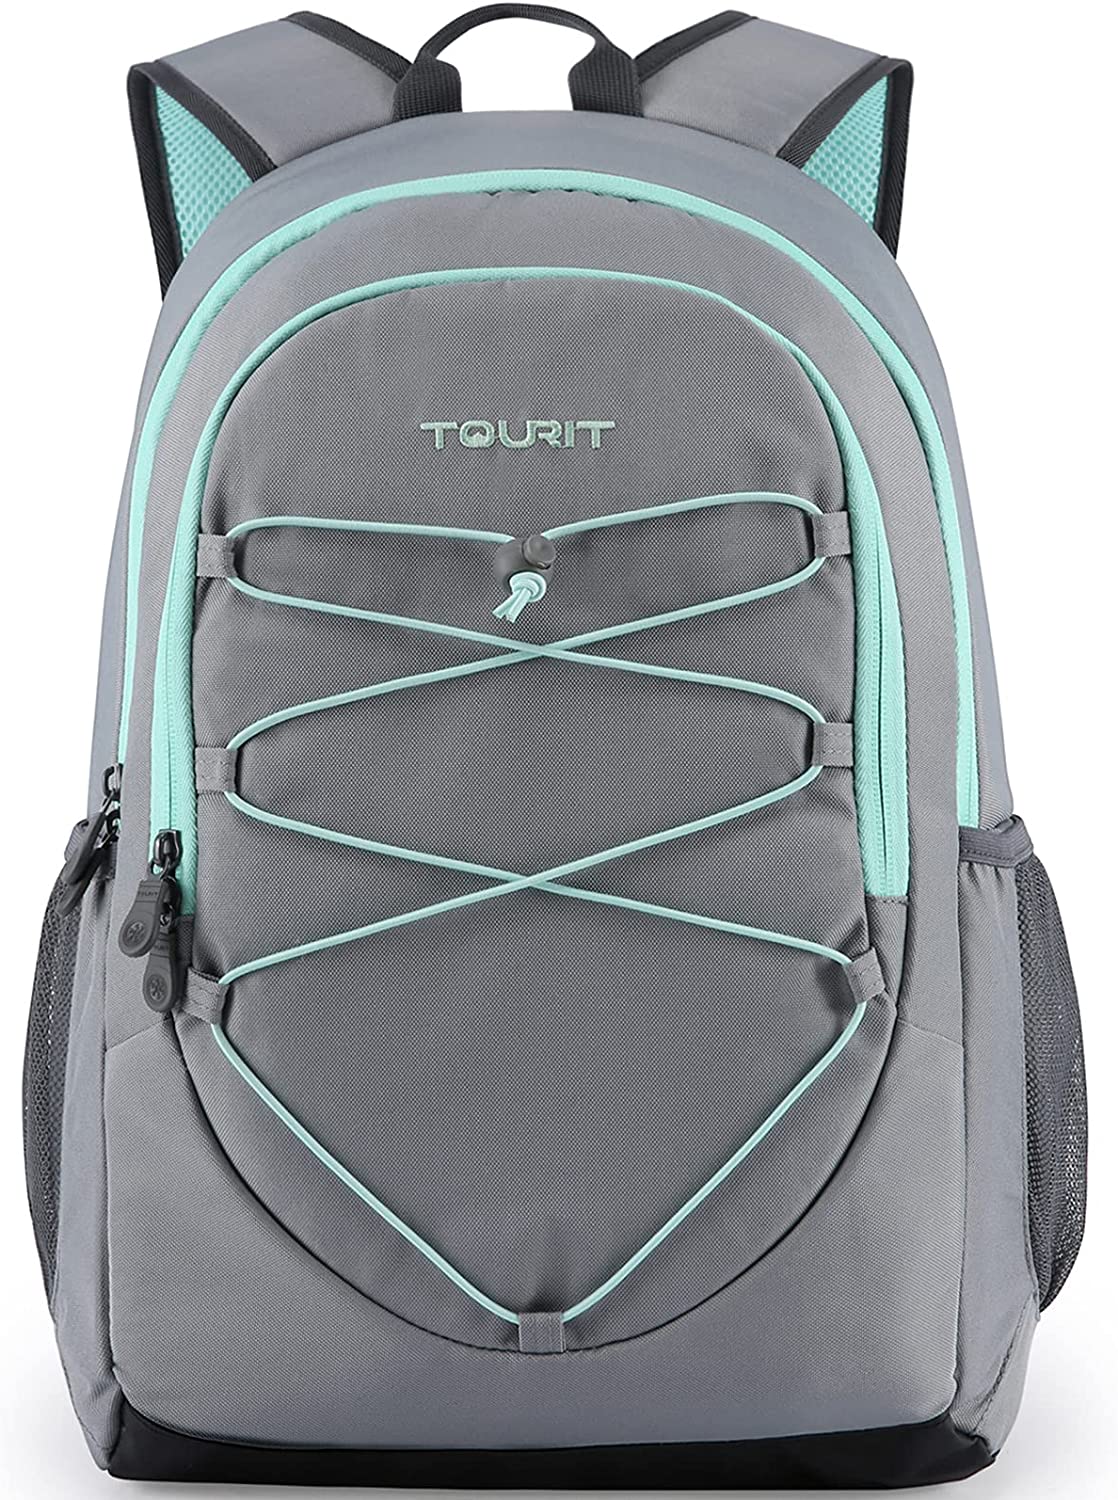 TOURIT Lightweight Leakproof Insulated Backpack Cooler